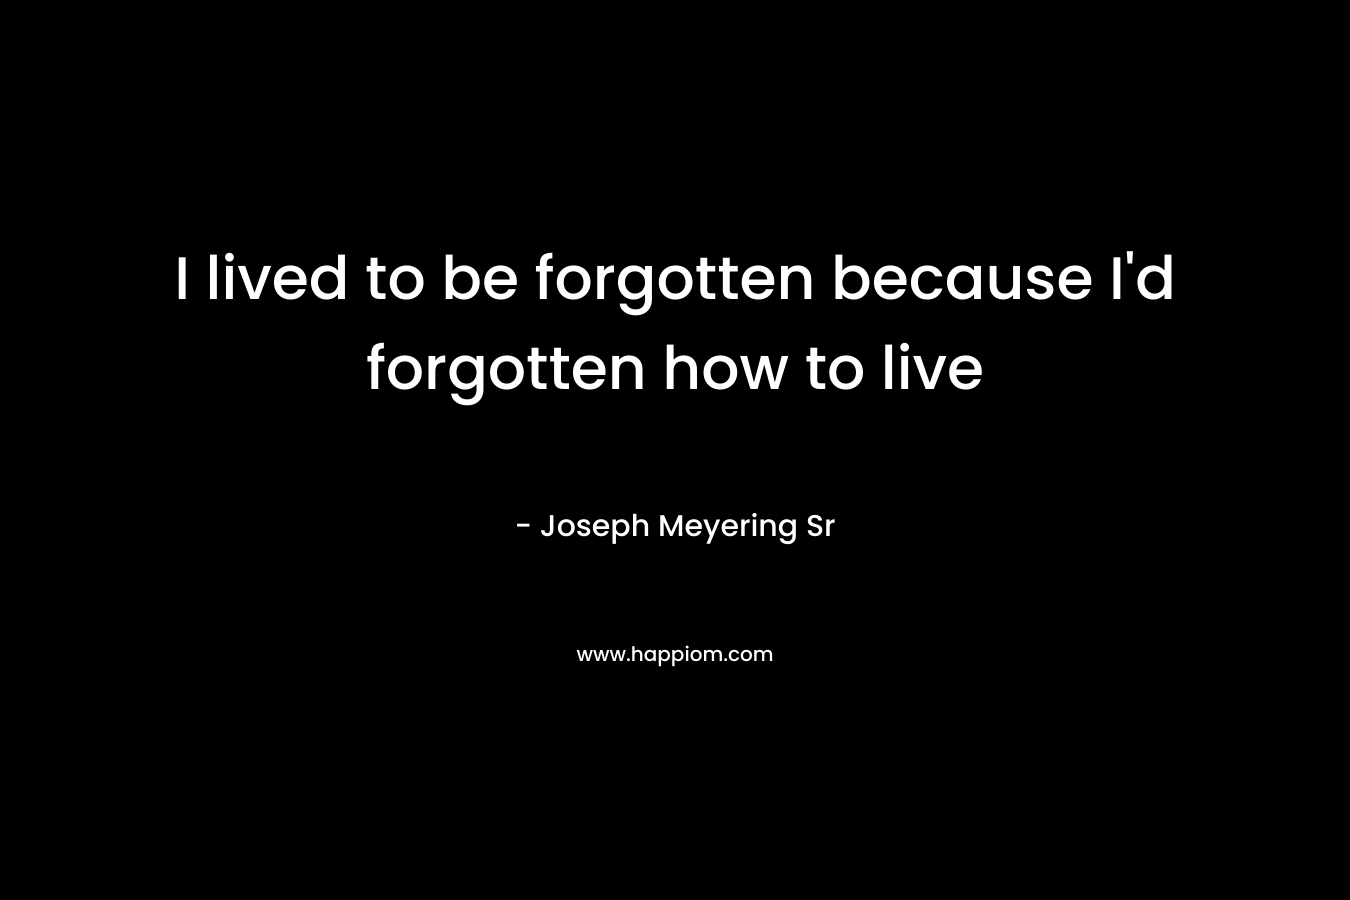 I lived to be forgotten because I'd forgotten how to live